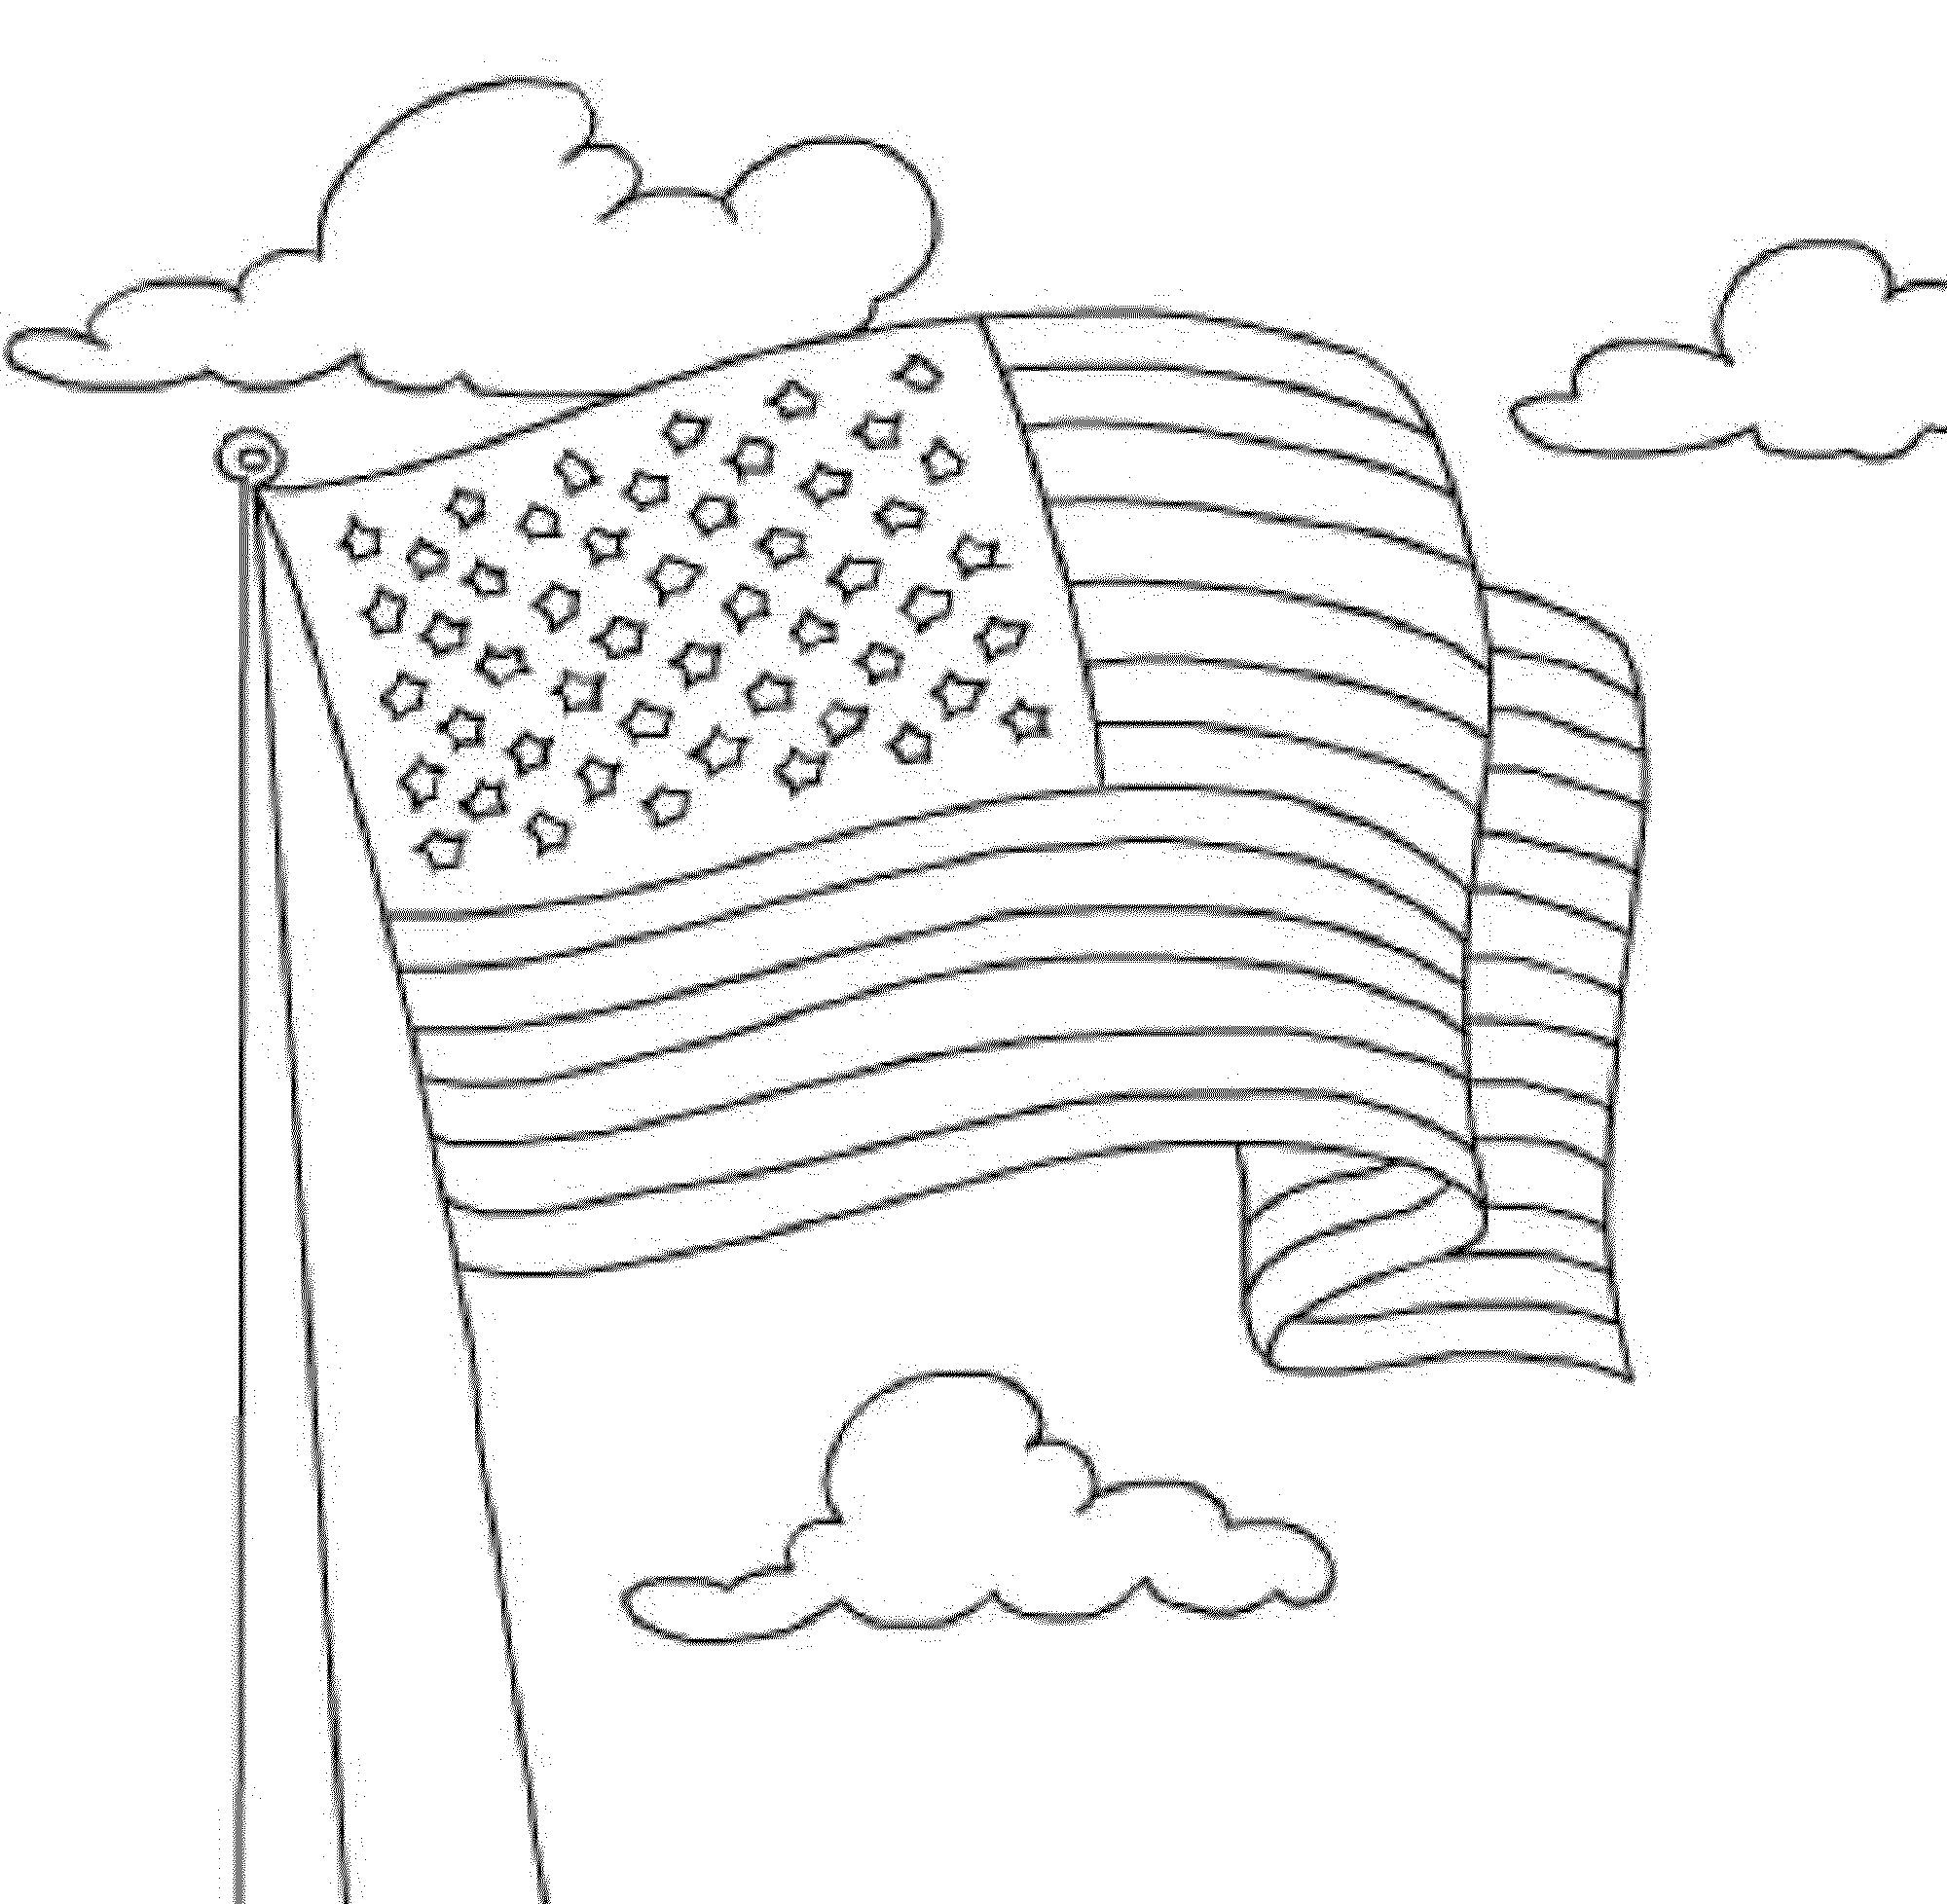 american-flag-coloring-page-for-the-love-of-the-country